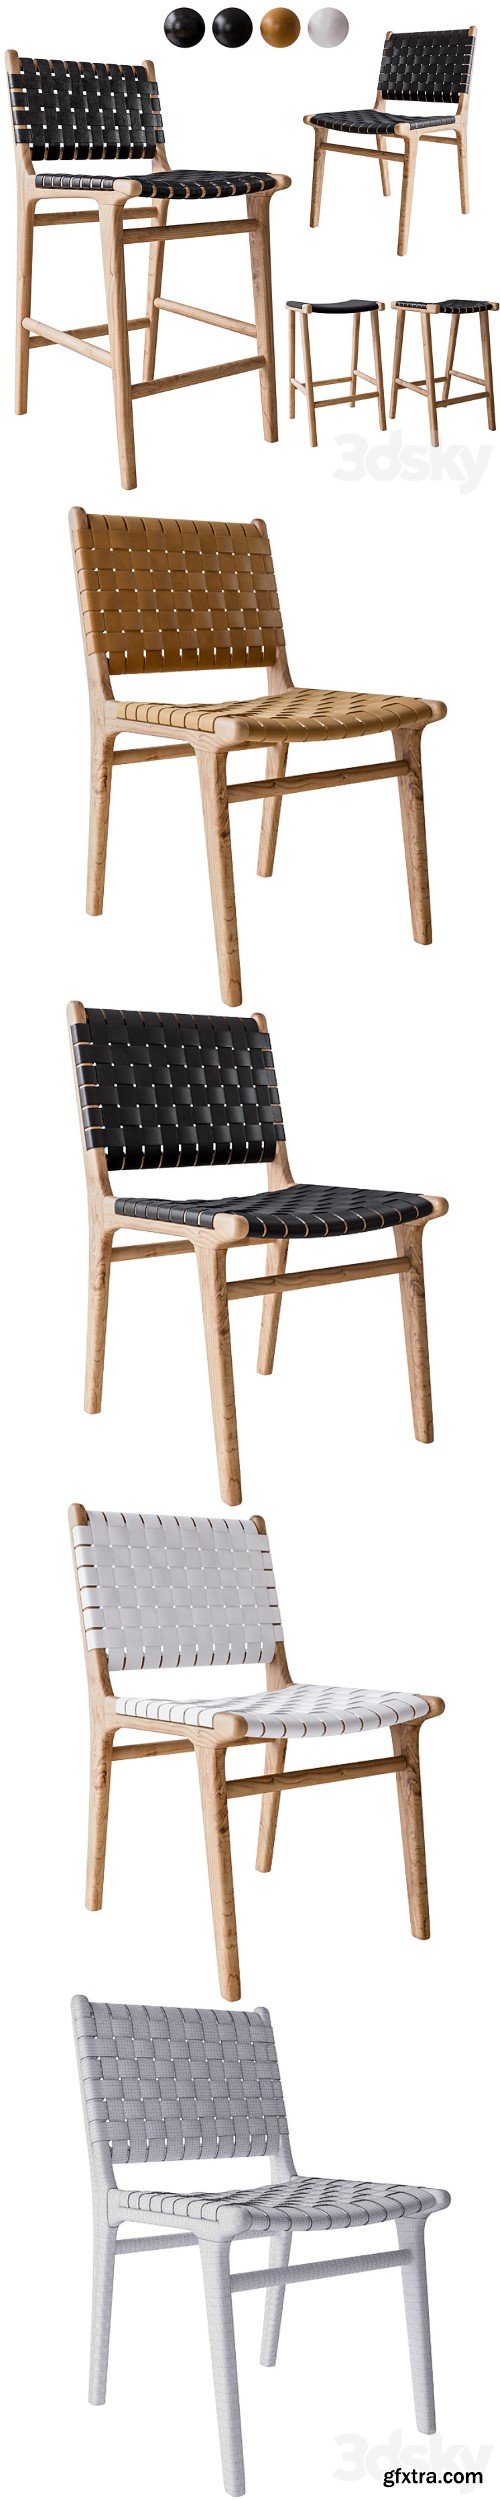 Flat and Leather Strapping Dining Chair and Stools